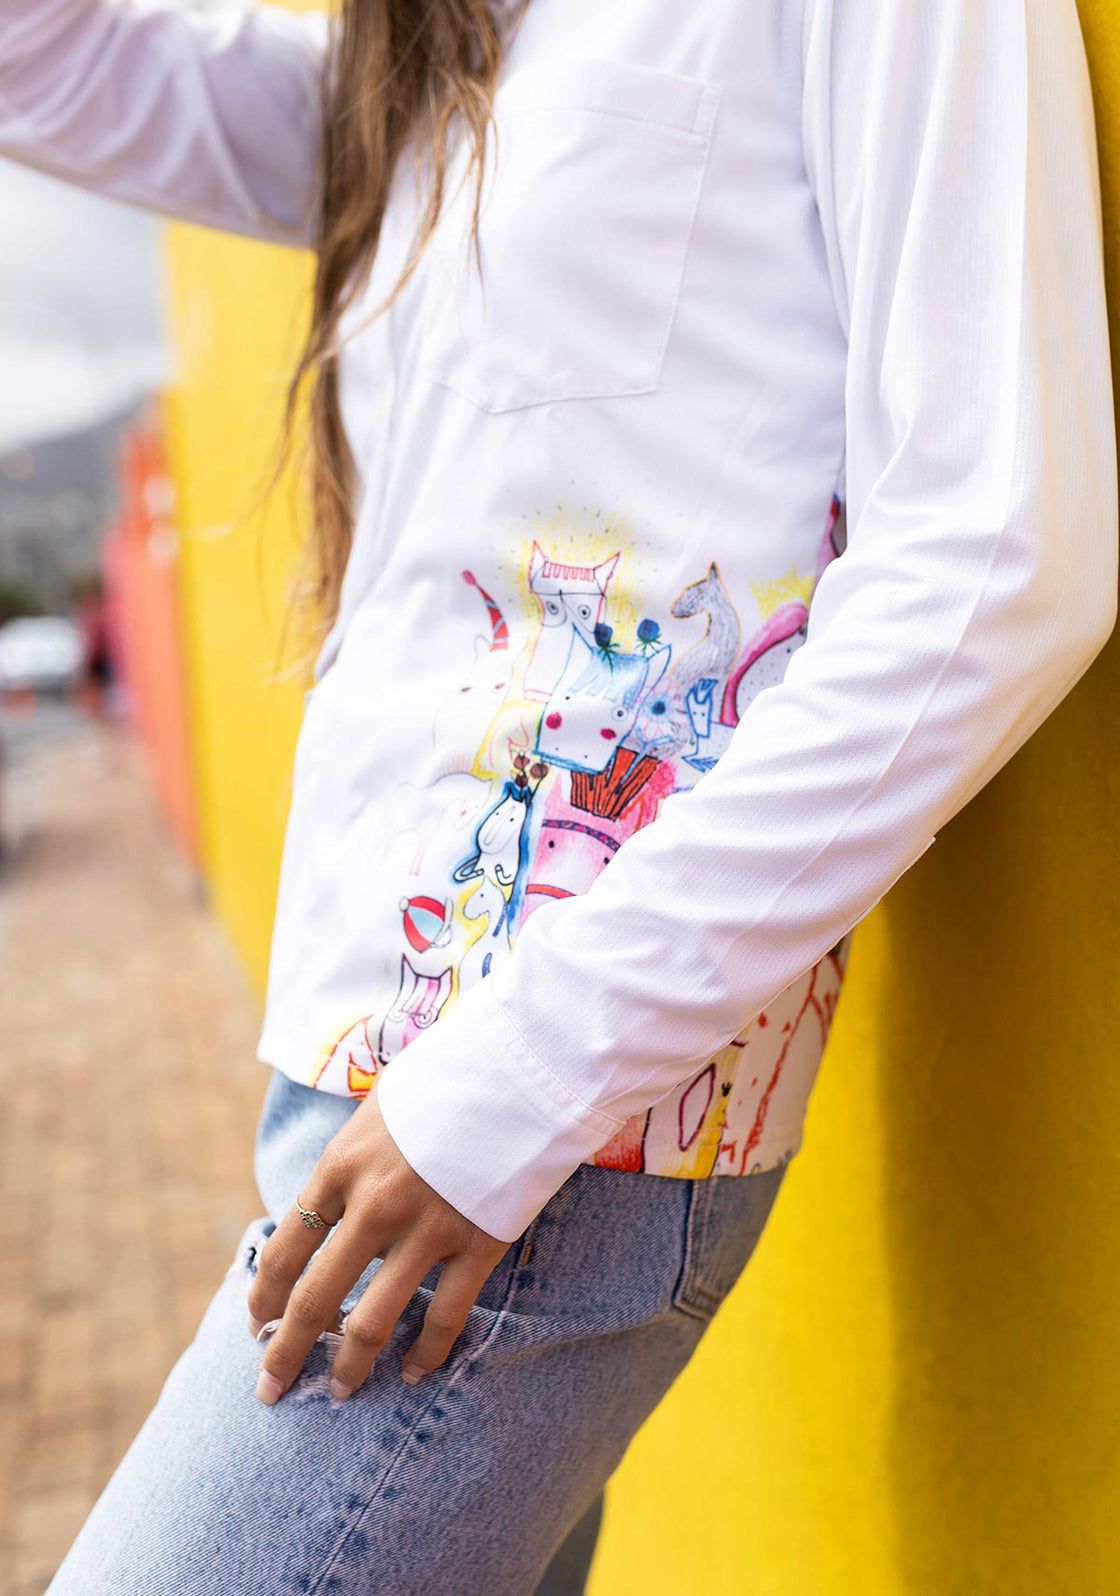 The Horse Fair on White Loose Fitting Button Shirt